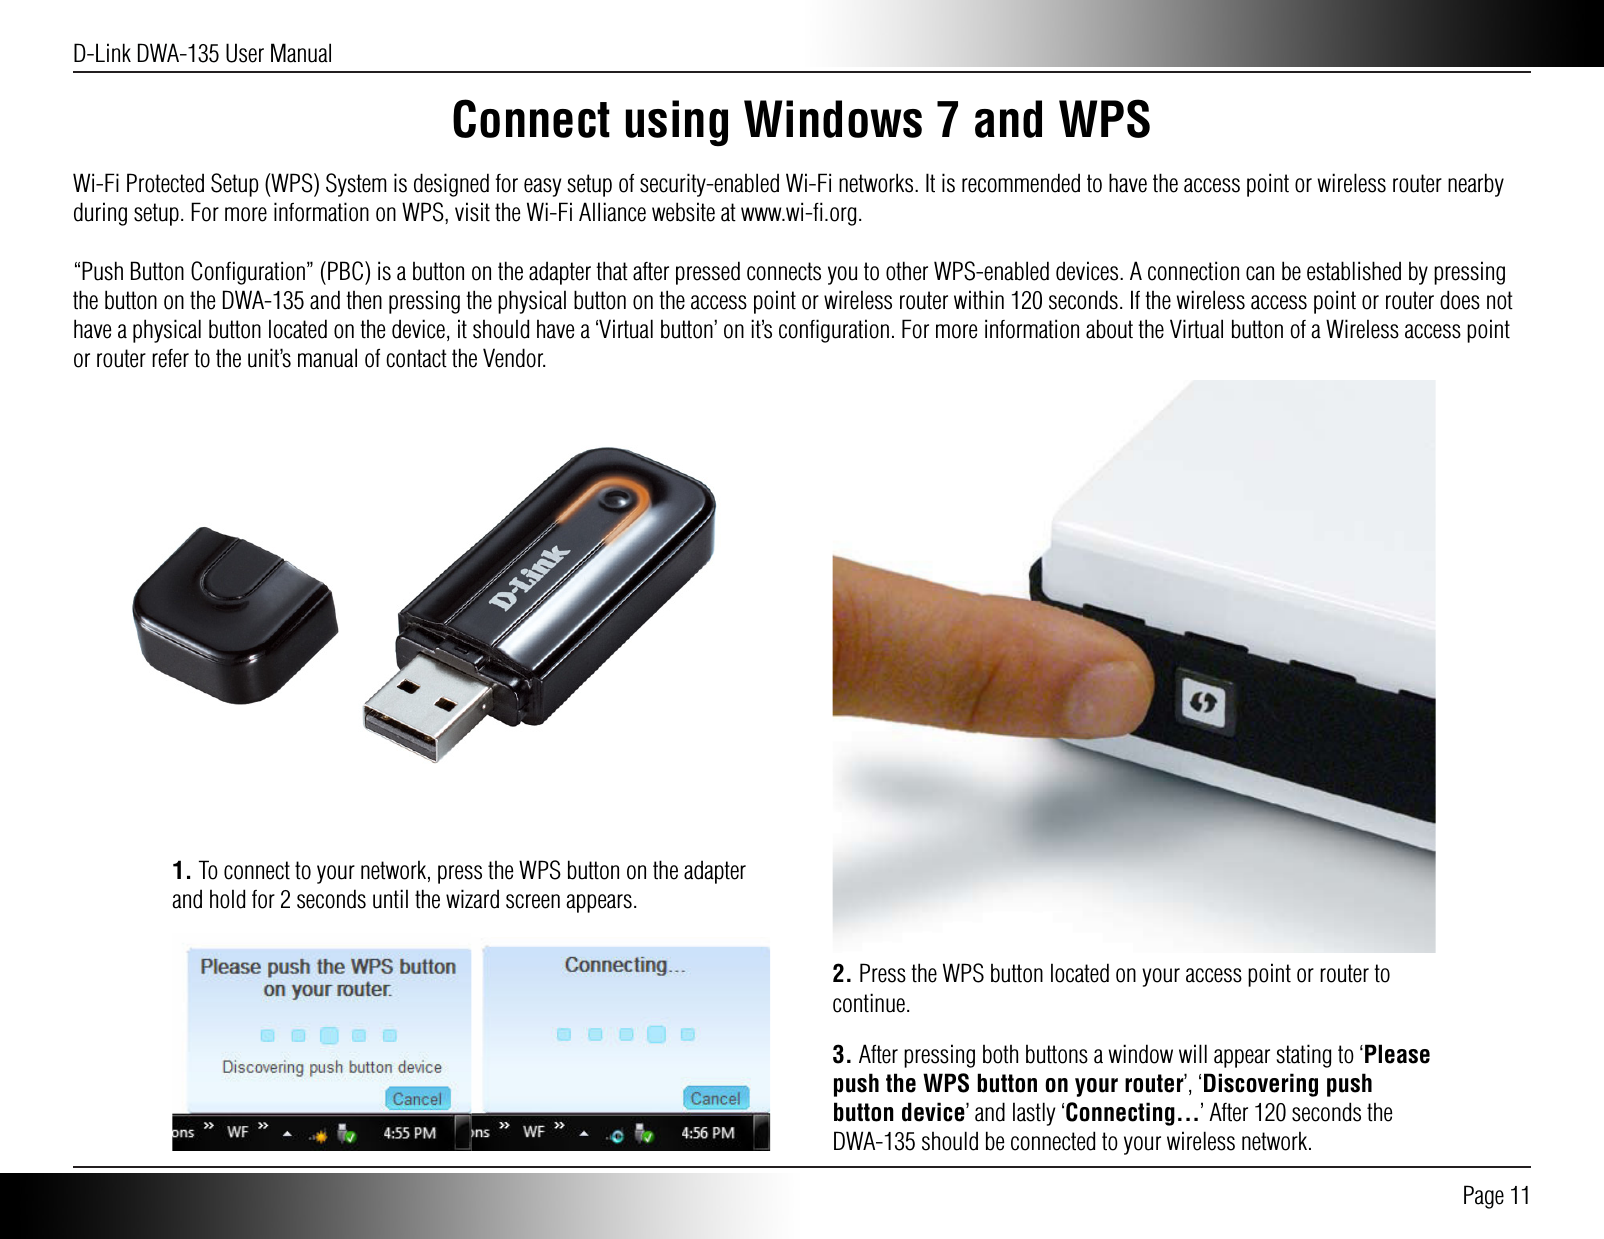 D-Link DWA-135 User Manual Page 11Connect using Windows 7 and WPSWi-Fi Protected Setup (WPS) System is designed for easy setup of security-enabled Wi-Fi networks. It is recommended to have the access point or wireless router nearby during setup. For more information on WPS, visit the Wi-Fi Alliance website at www.wi-ﬁ.org.“Push Button Conﬁguration” (PBC) is a button on the adapter that after pressed connects you to other WPS-enabled devices. A connection can be established by pressing the button on the DWA-135 and then pressing the physical button on the access point or wireless router within 120 seconds. If the wireless access point or router does not have a physical button located on the device, it should have a ‘Virtual button’ on it’s conﬁguration. For more information about the Virtual button of a Wireless access point or router refer to the unit’s manual of contact the Vendor.2. Press the WPS button located on your access point or router to continue. 1. To connect to your network, press the WPS button on the adapter and hold for 2 seconds until the wizard screen appears.3. After pressing both buttons a window will appear stating to ‘Please push the WPS button on your router’, ‘Discovering push button device’ and lastly ‘Connecting...’ After 120 seconds the DWA-135 should be connected to your wireless network.